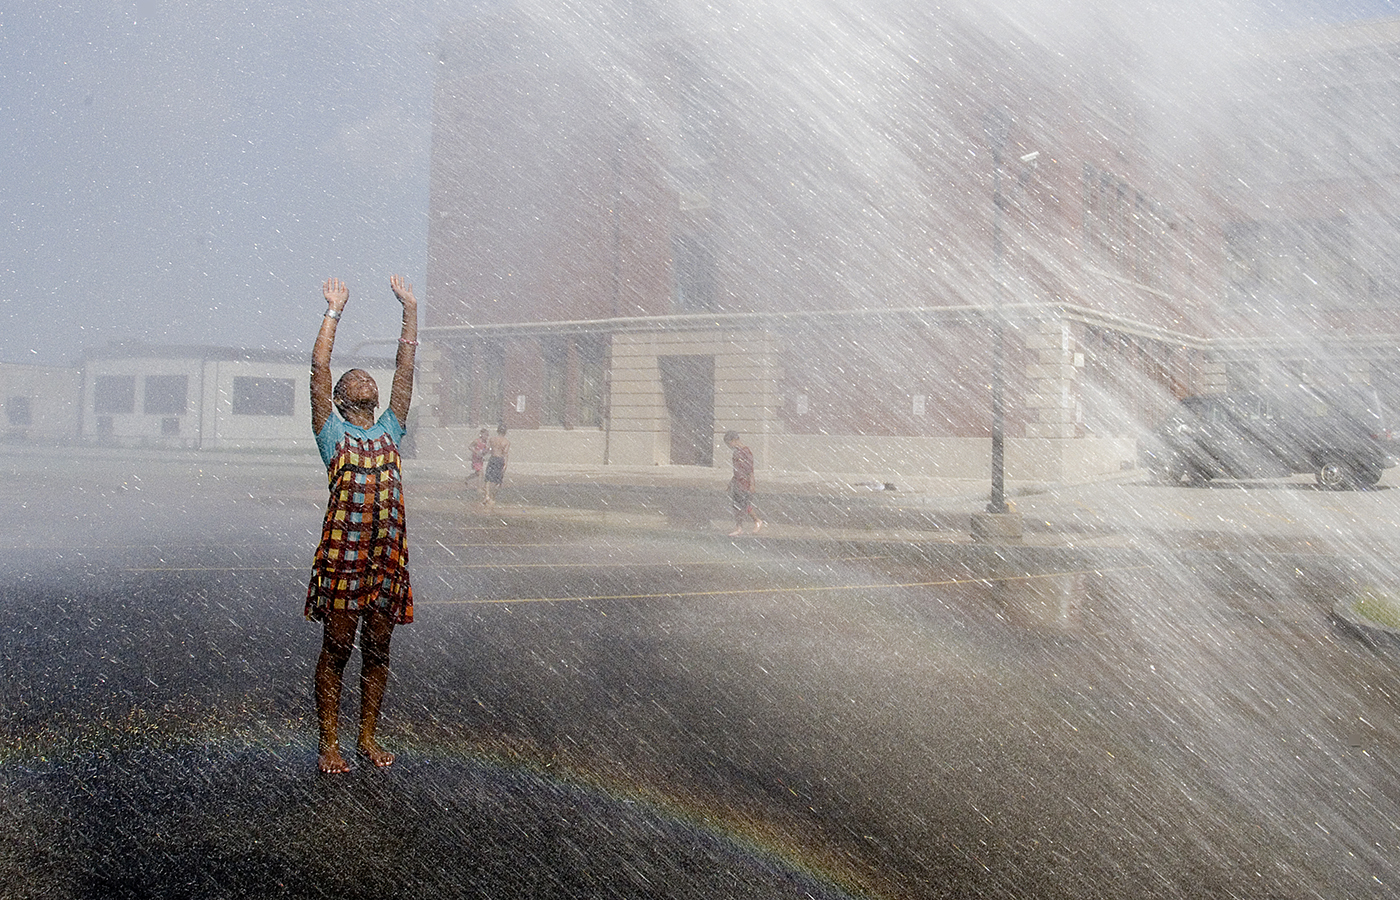 Ajanee Mohammed, 11, of Rochester, cool off in the spray from an open fire hydrant at School 41 on Ridge Road. The city opened hydrants and spray parks across the city to help residents cool off on a hot day. (staff photo by Jeffrey Blackwell)  (staff photo by Jeffrey Blackwell)